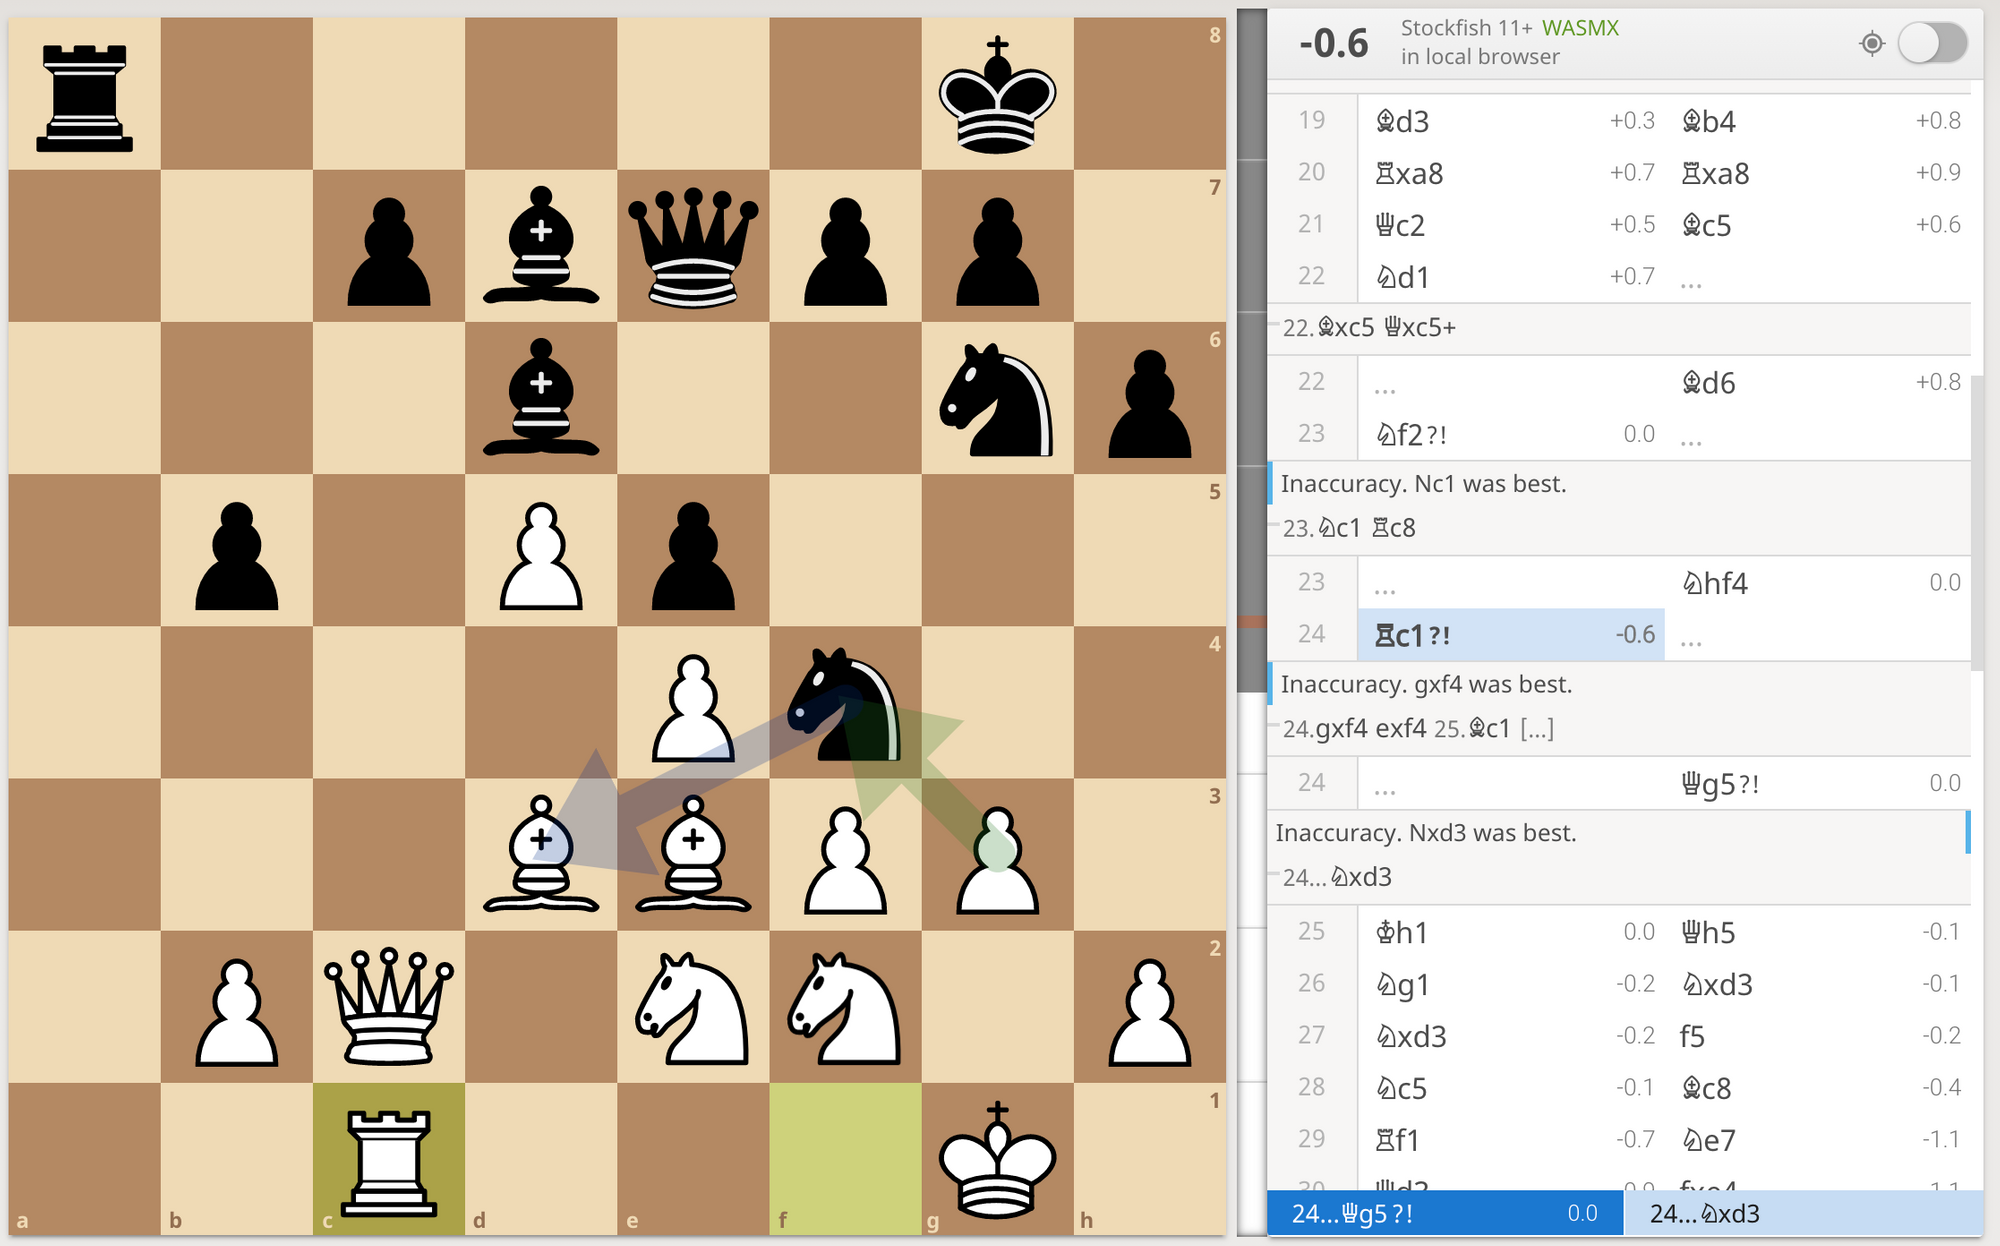 Are lichess chess rating accurate compared to fide? - Quora